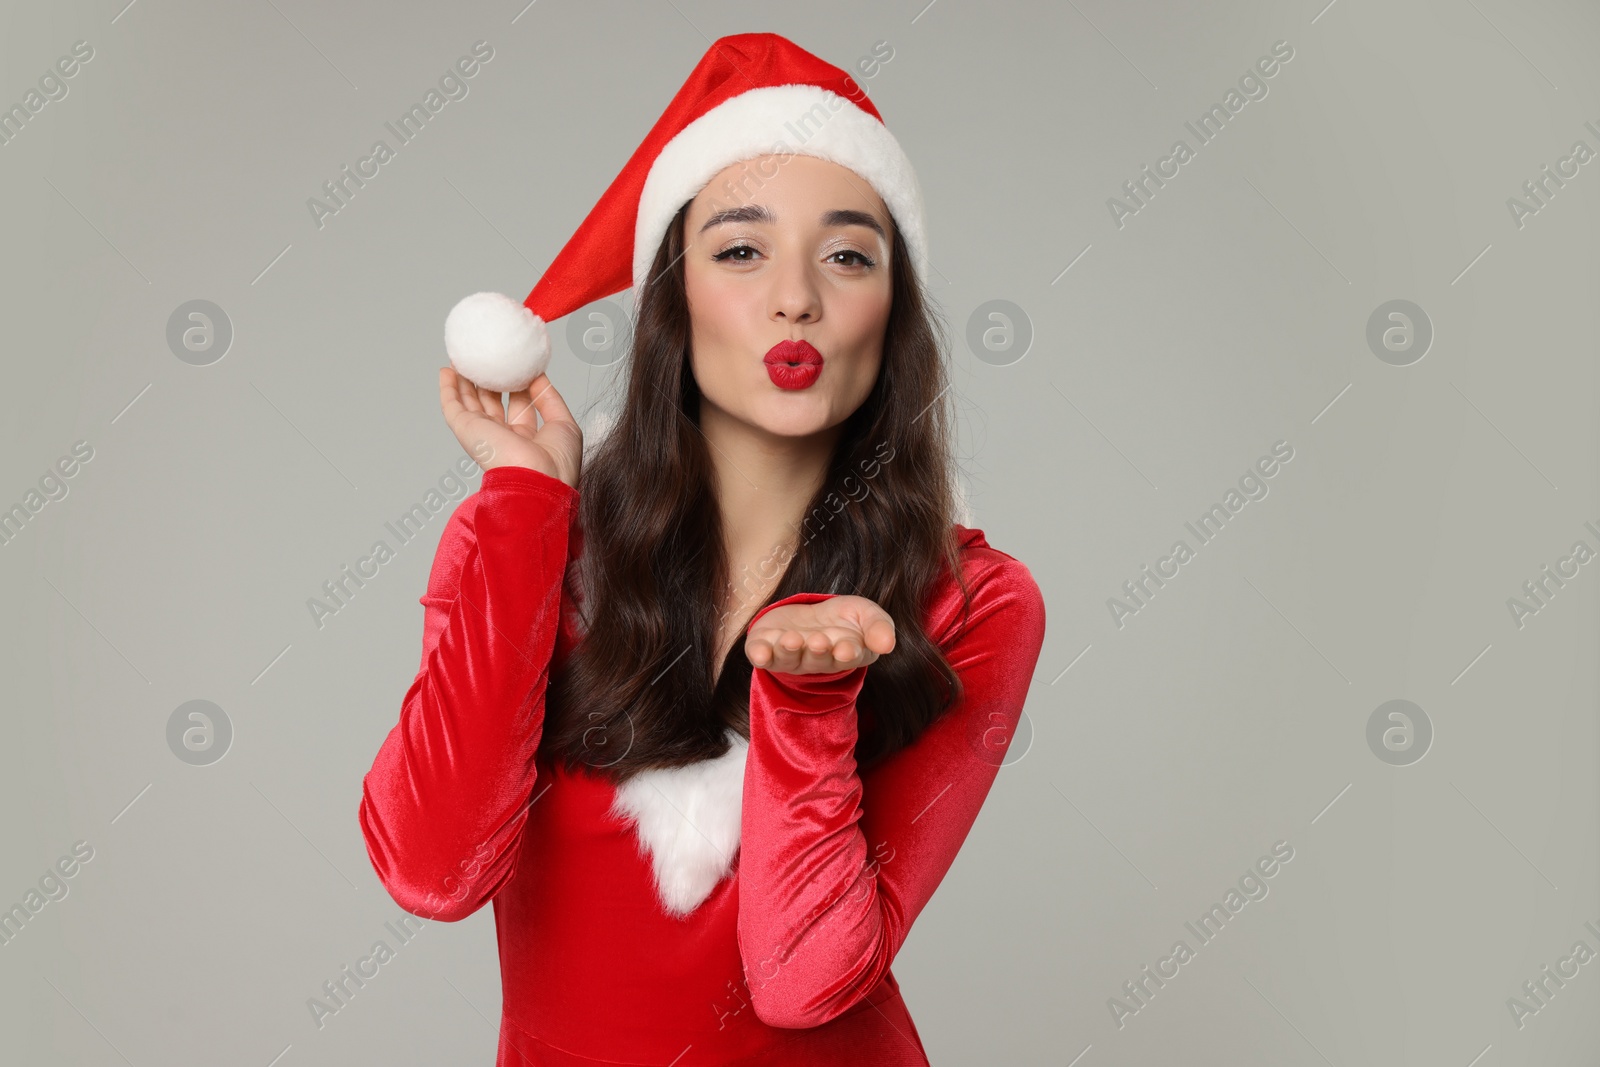 Photo of Christmas celebration. Beautiful young woman in red dress and Santa hat blowing kiss on grey background, space for text